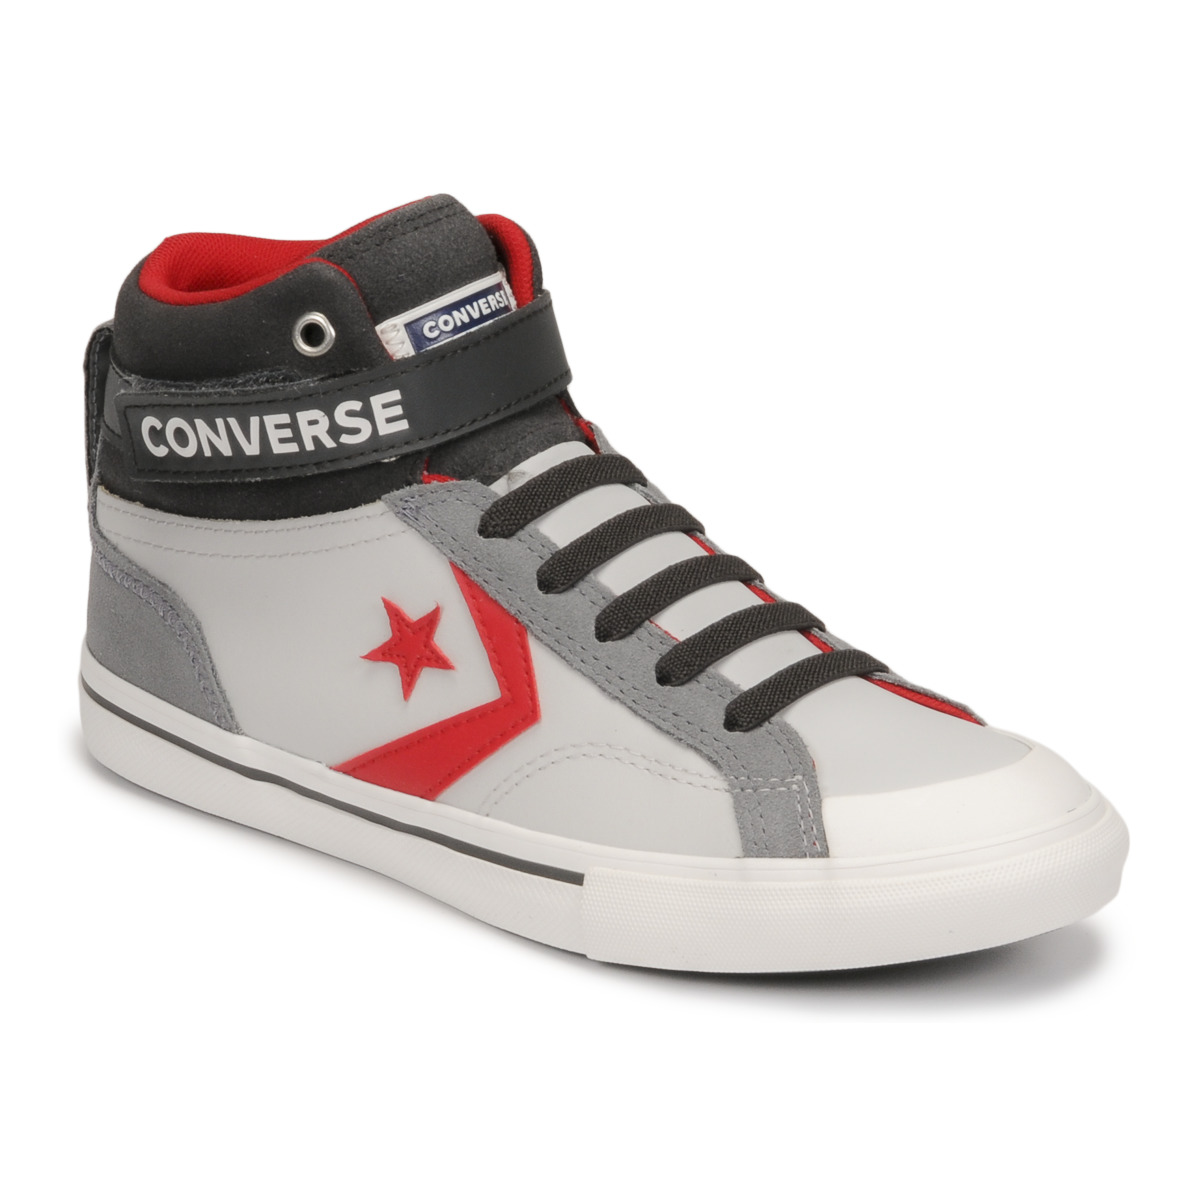 Shoes top Grey Converse trainers Free PRO HI ! - £ Delivery STRAP - BLAZE TWIST Child Hi with Rubbersole.co.uk LEATHER